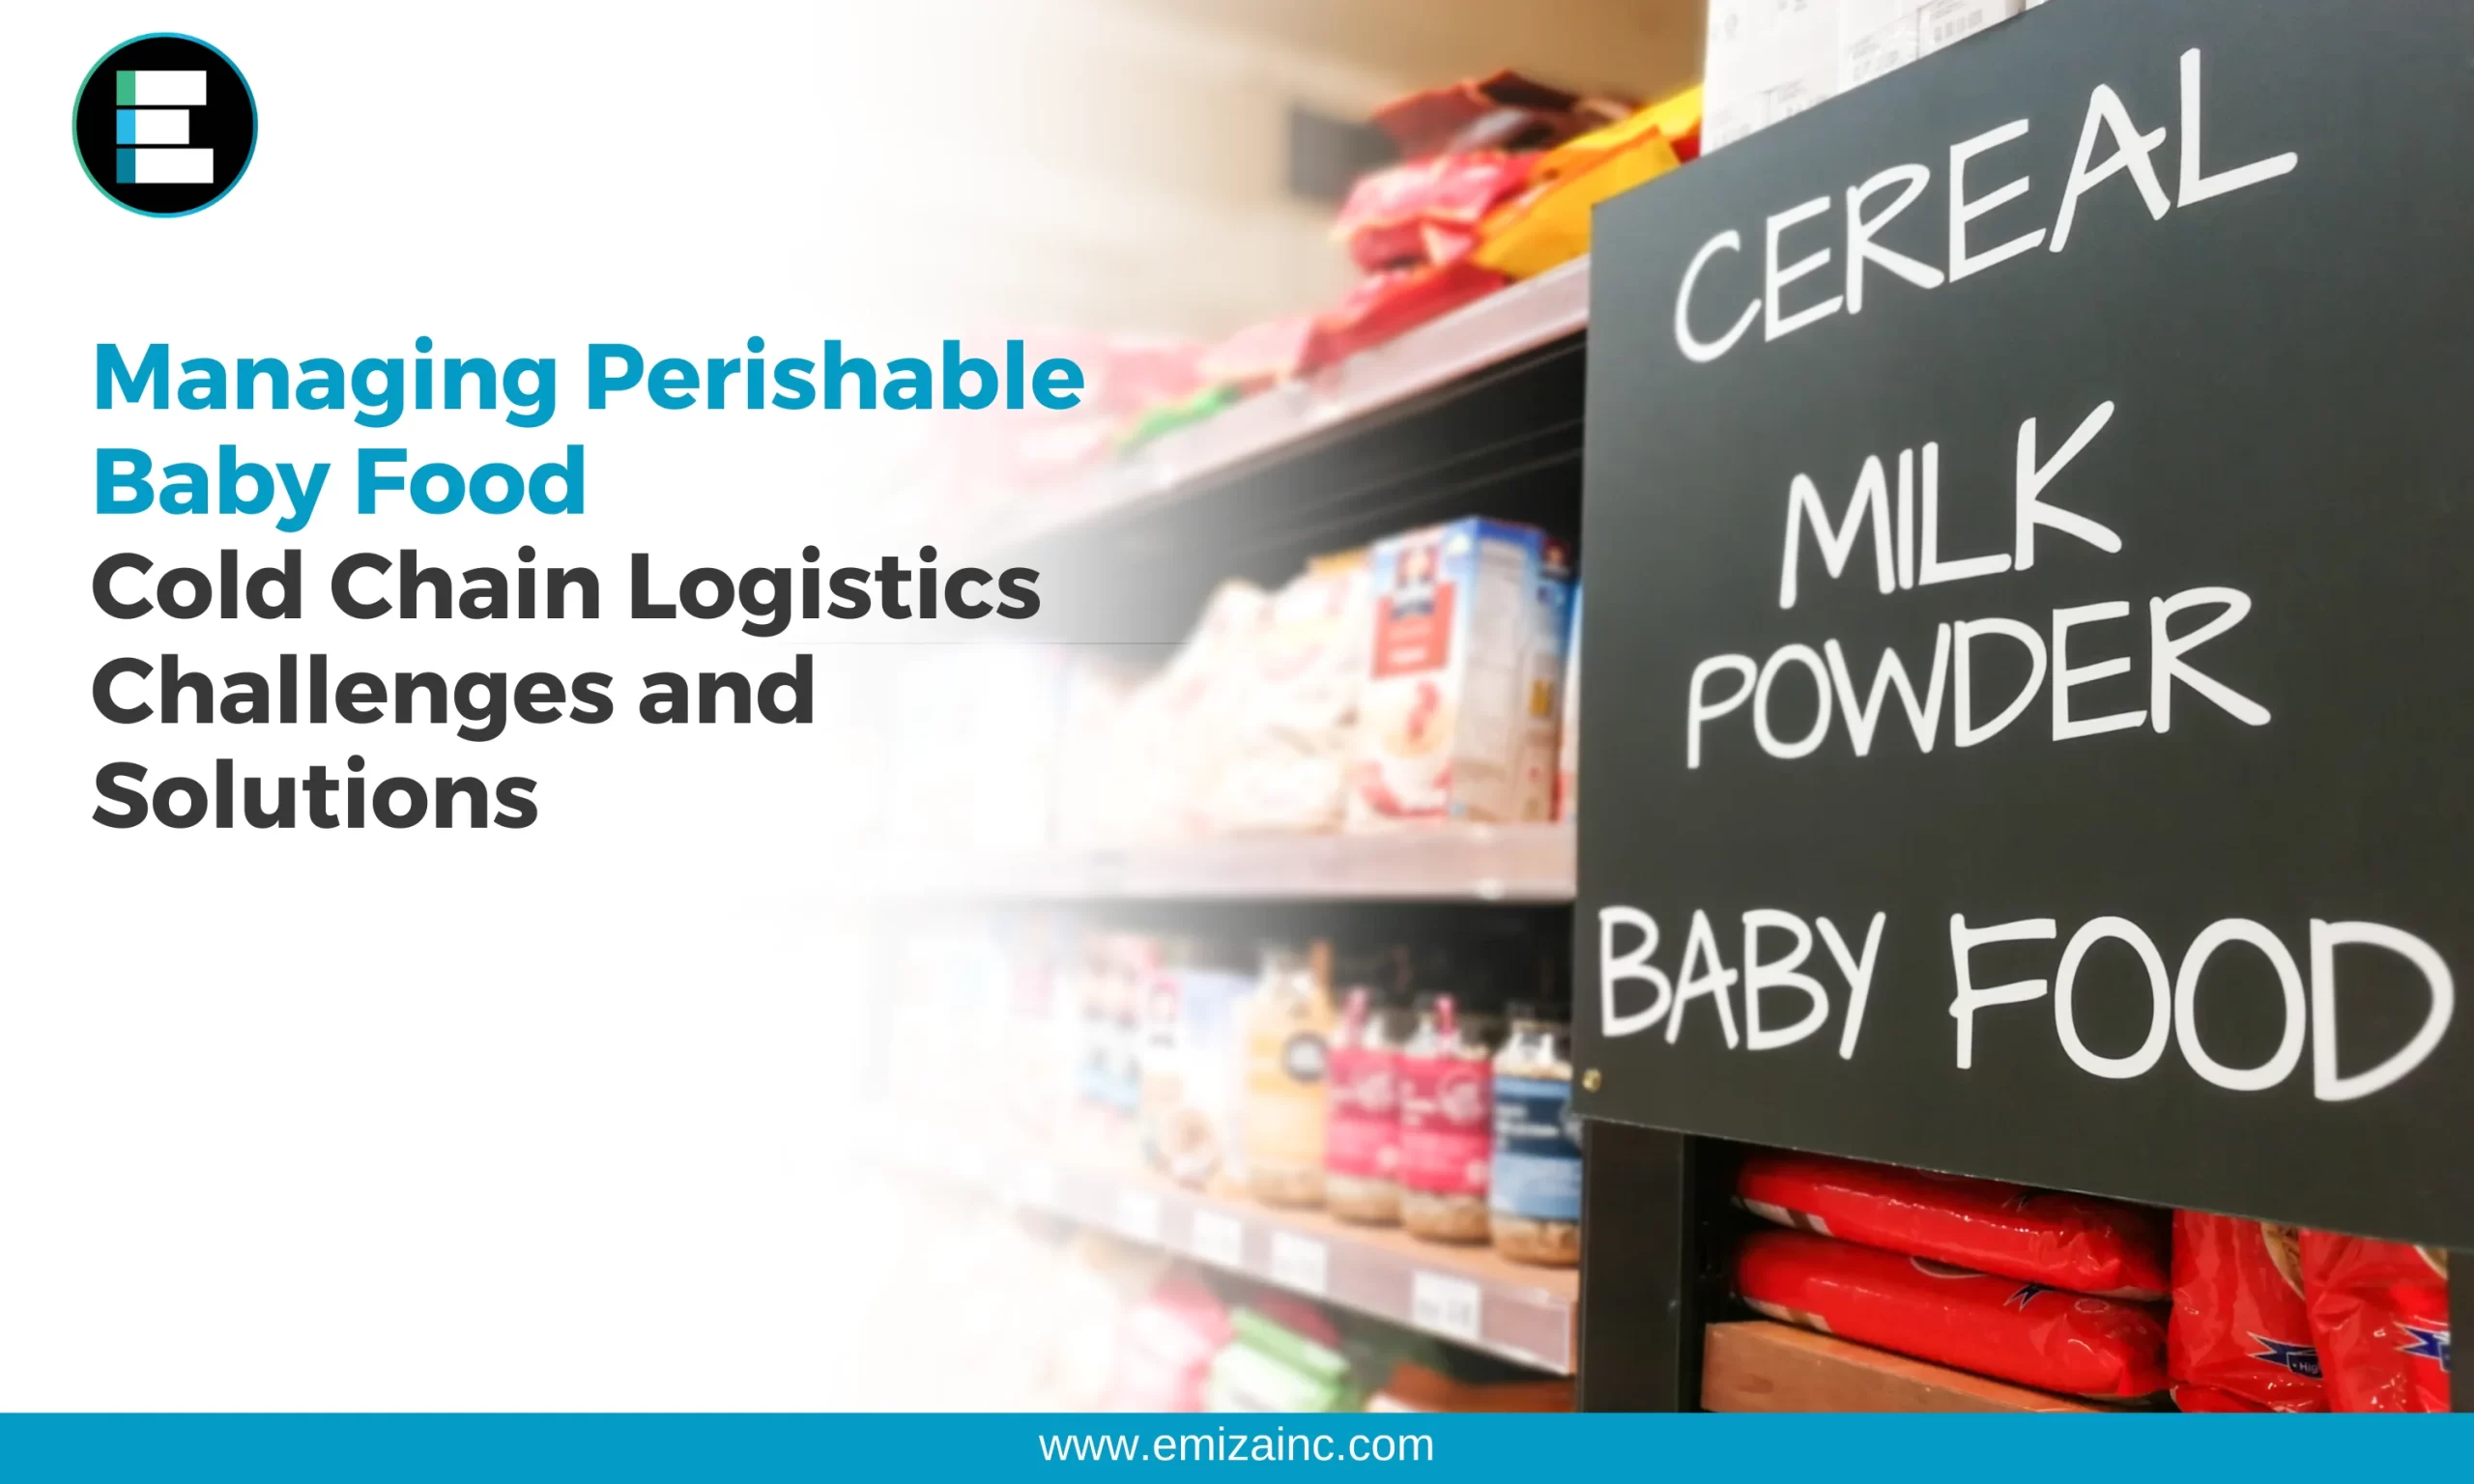 Managing Perishable Baby Food Cold Chain Logistics Challenges and Solutions